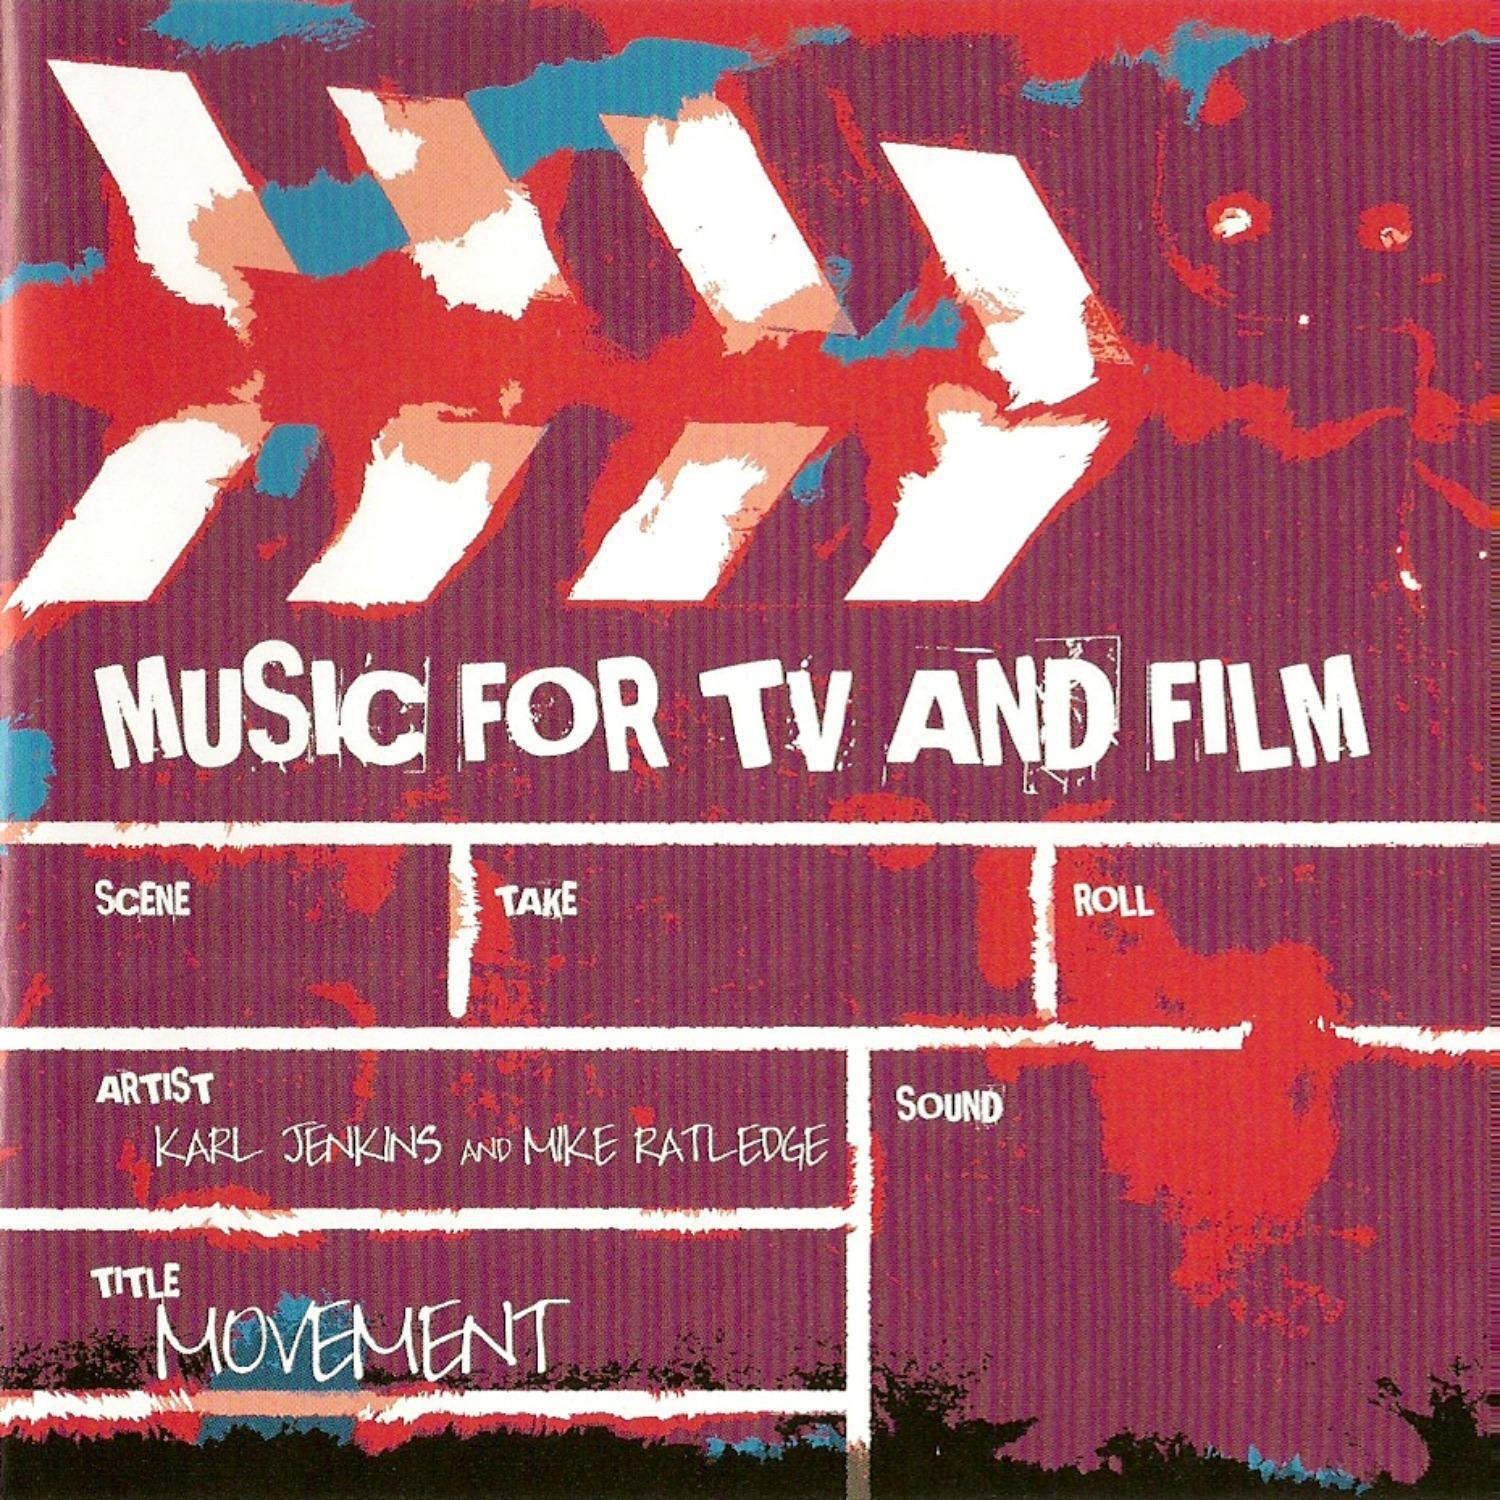 Music for T.V and Film - Movement